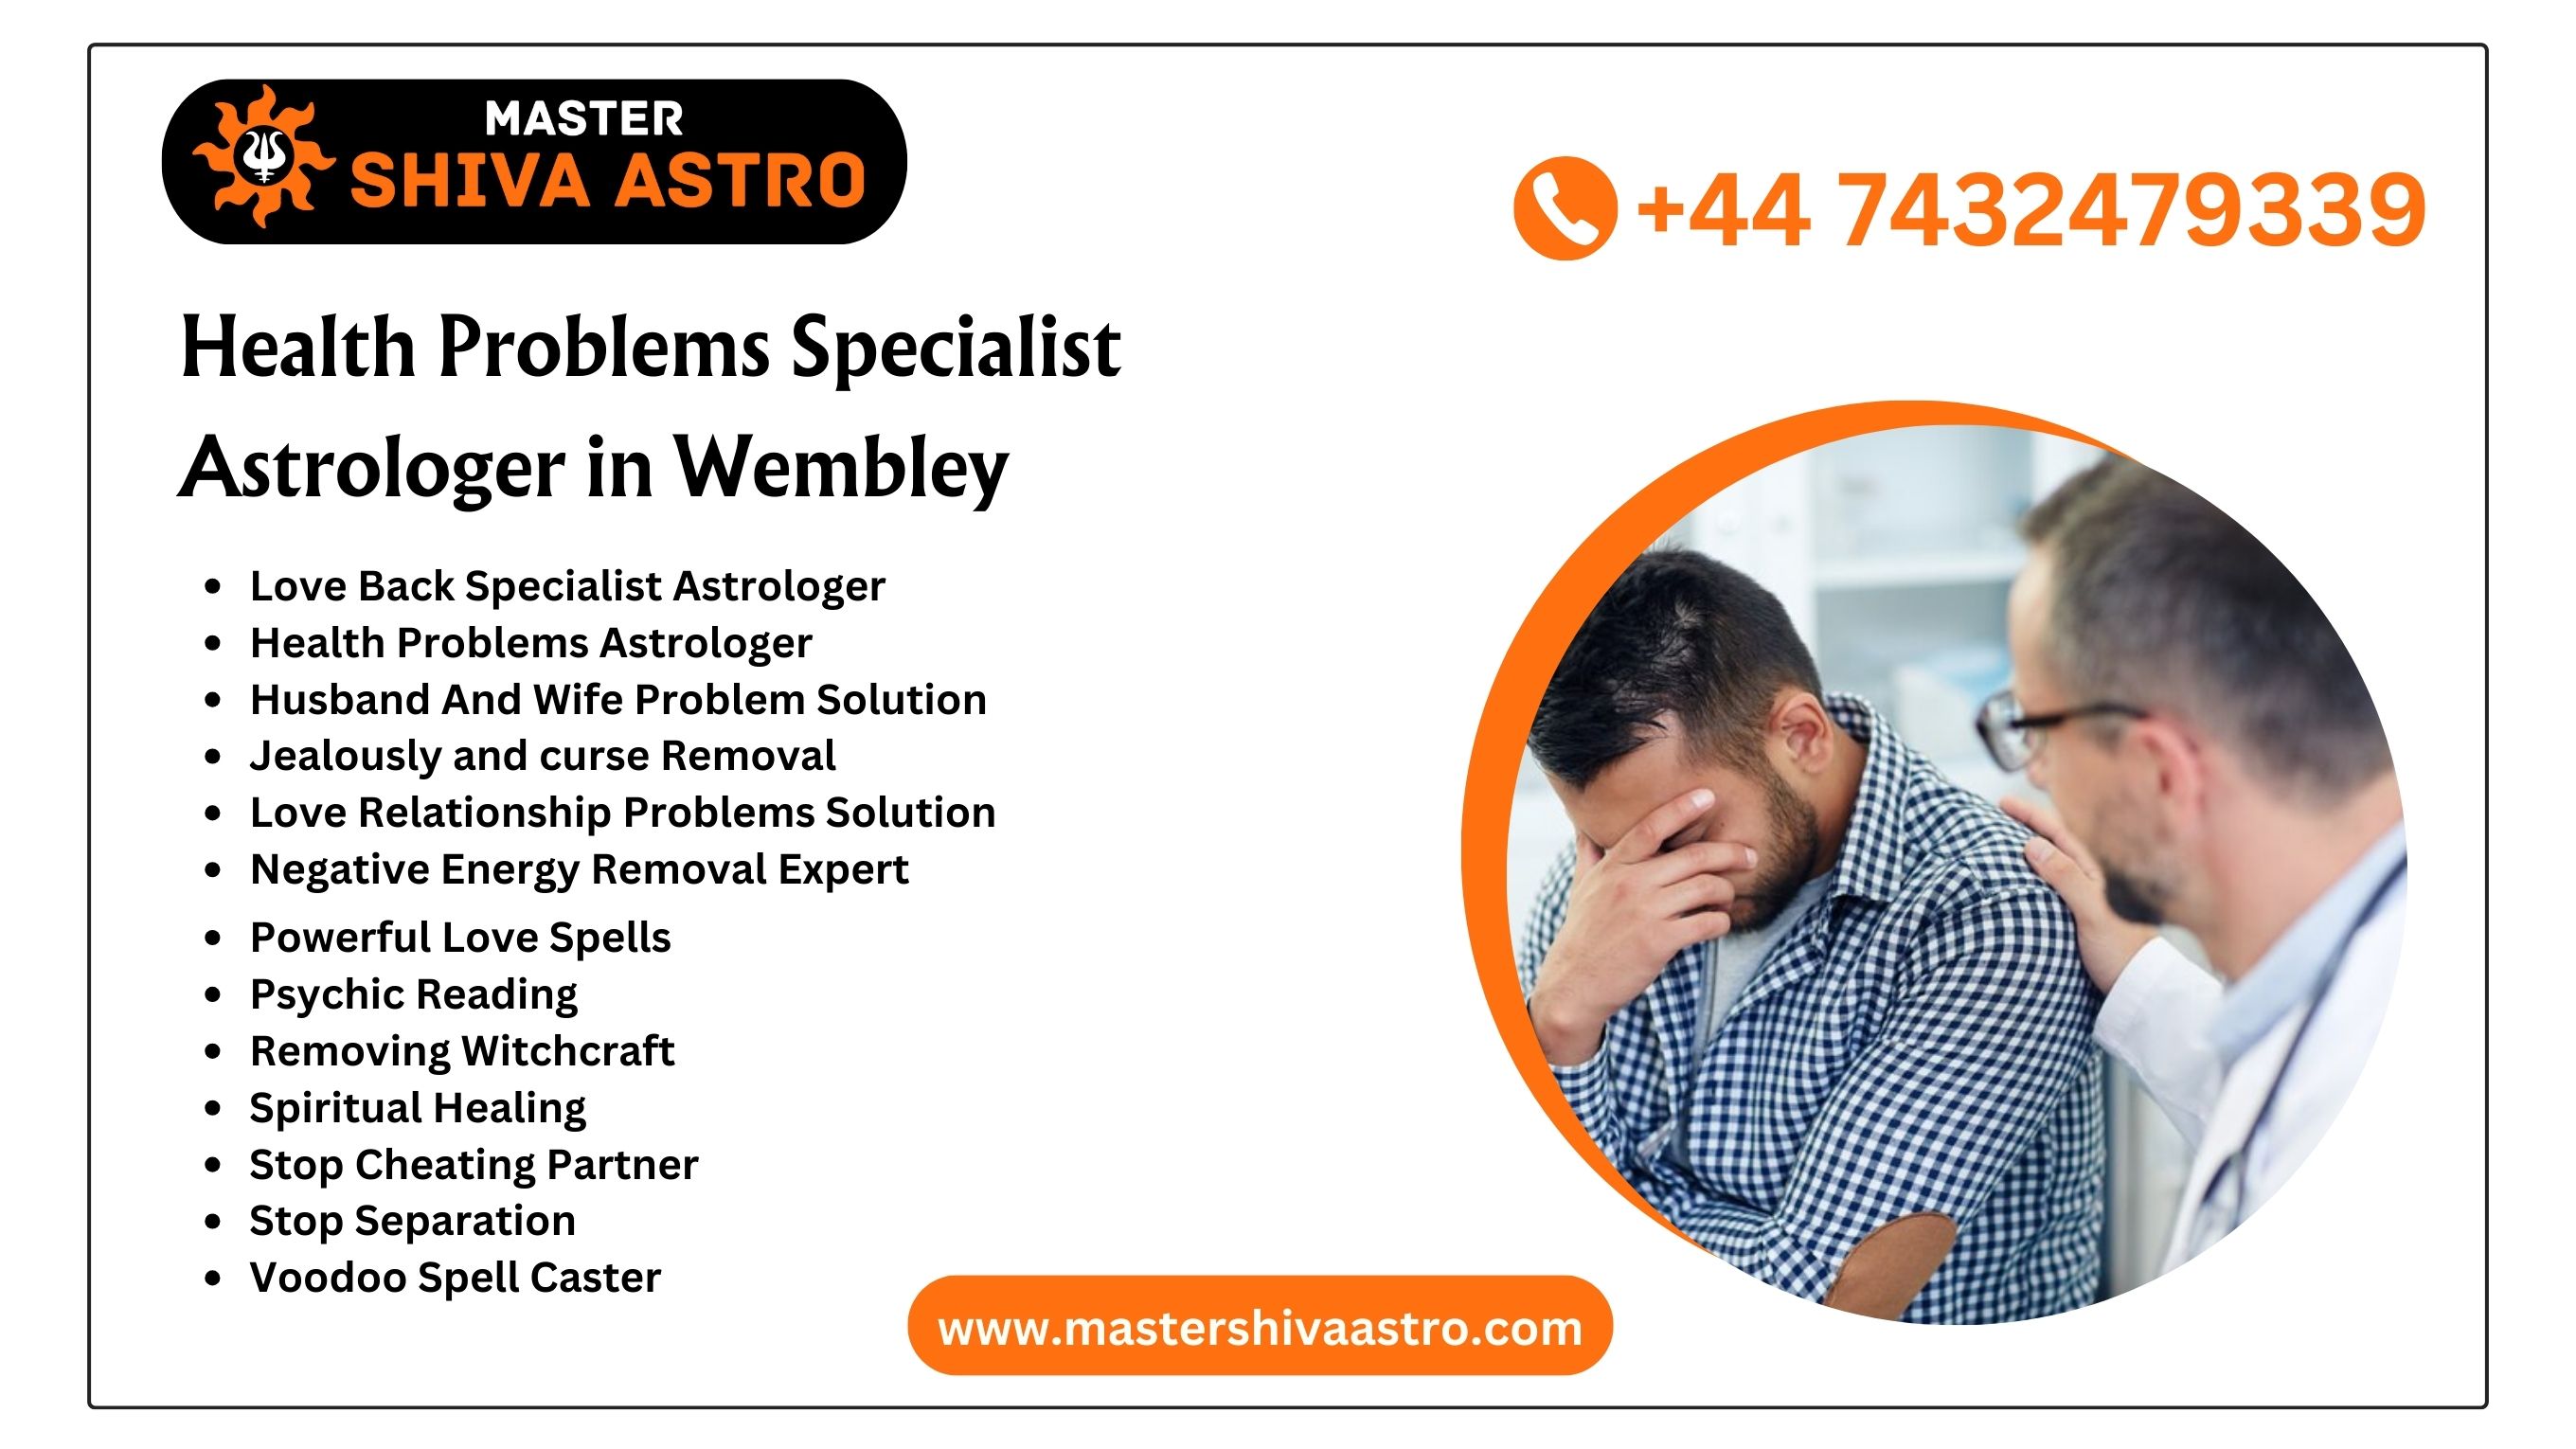 Health Problems Specialist Astrologer in Wembley